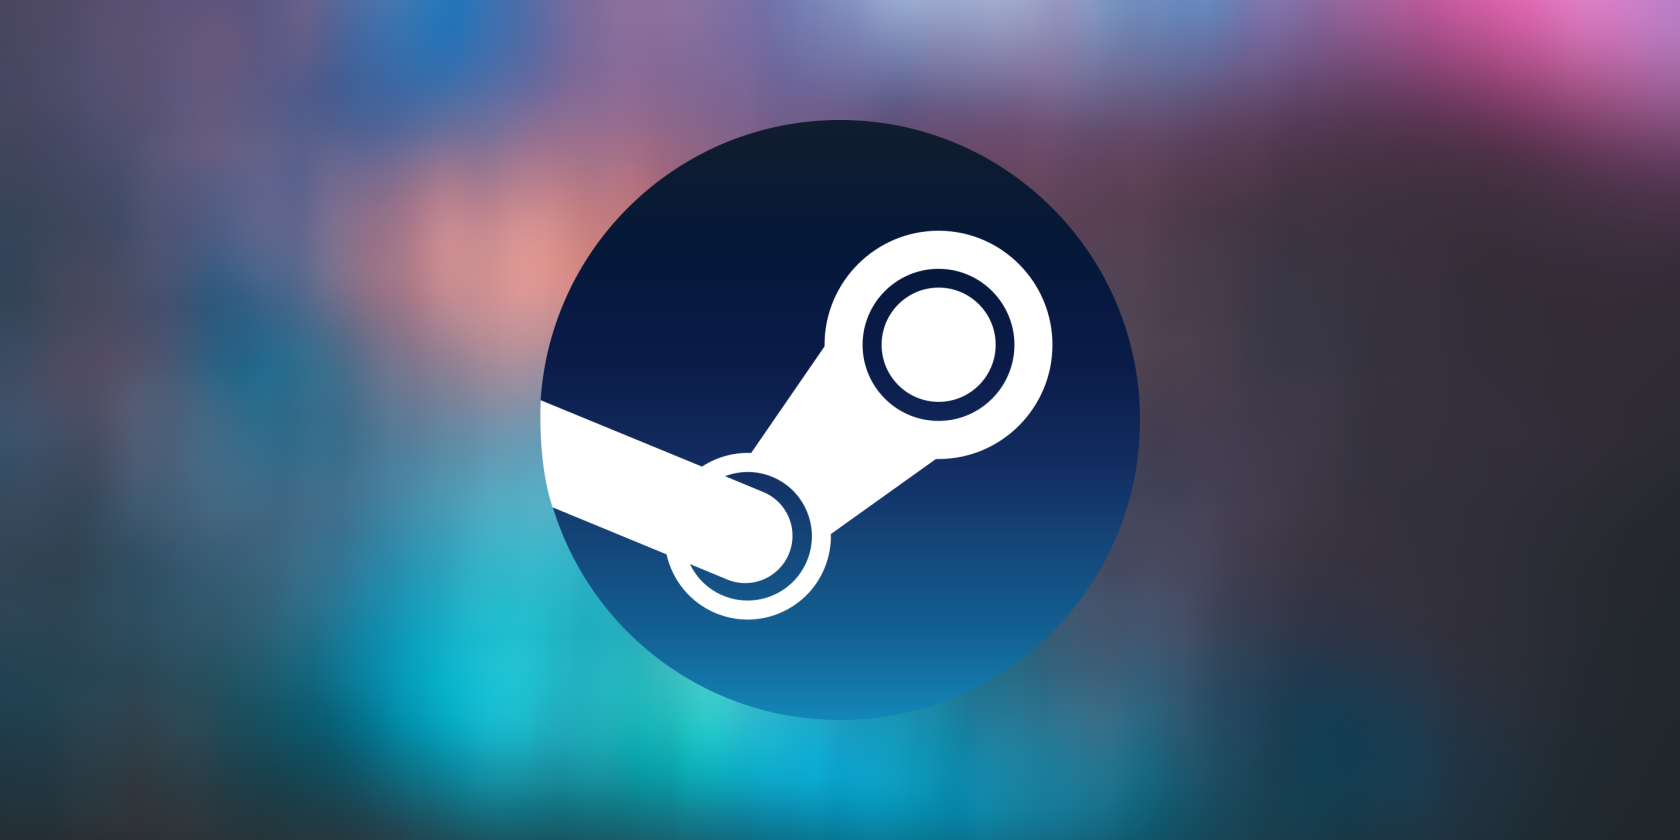 how to refund games on steam